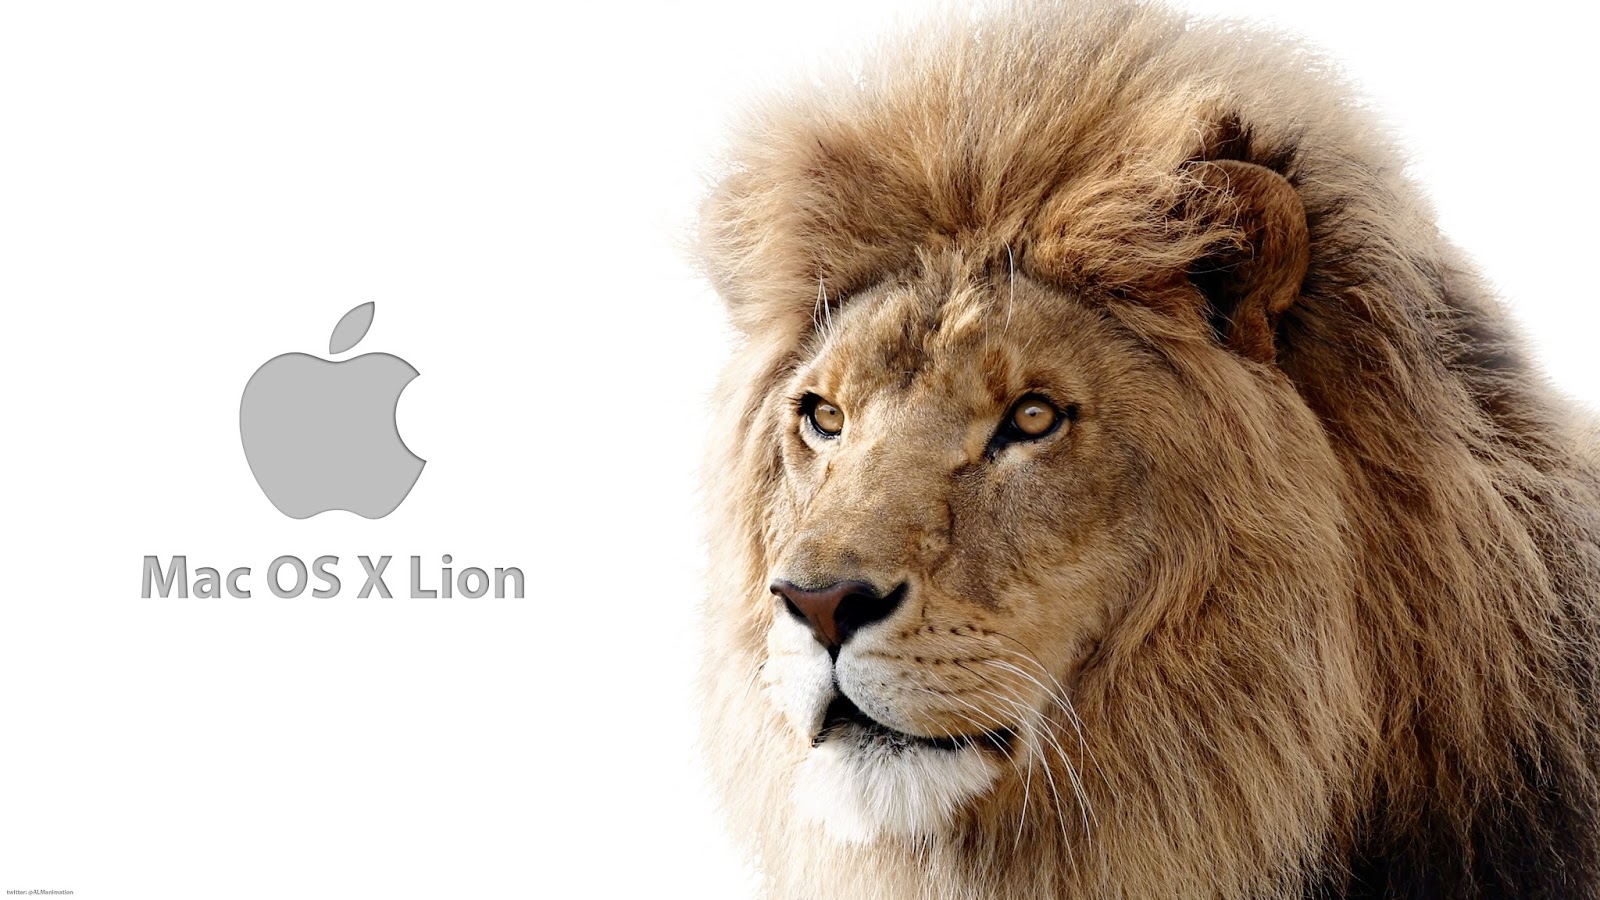 download mac os x lion 10.7 for free iso image